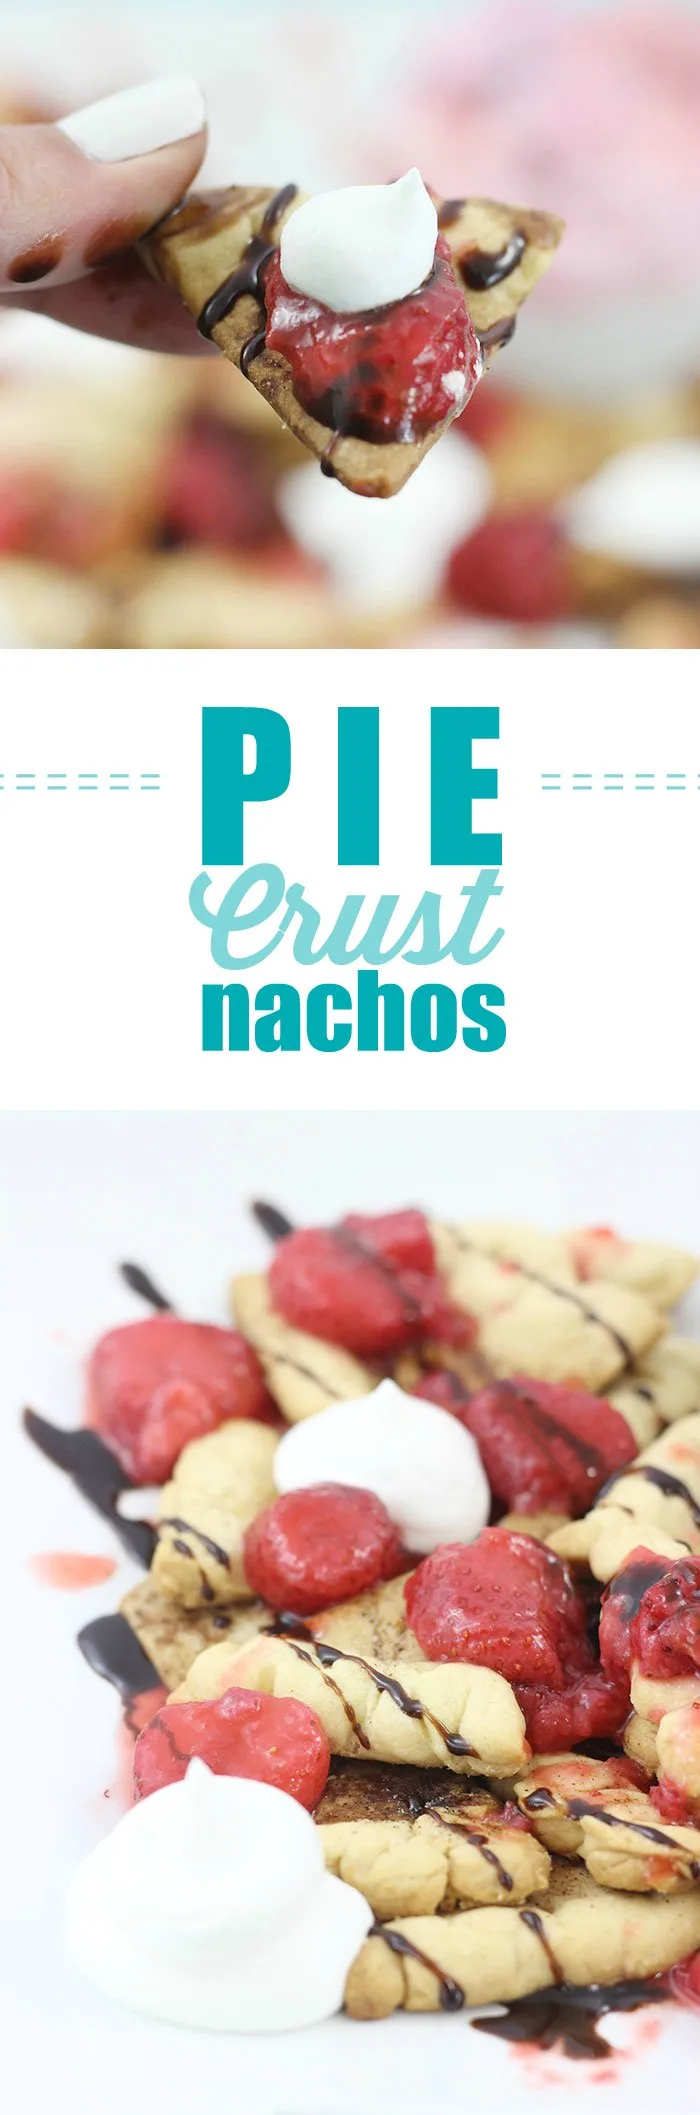 Pie Crust Nachos using baked Pie Crust cut into tortilla shaped and topped with Berry infused Whipped Topping, Strawberry sauce & Chocolate drizzle.